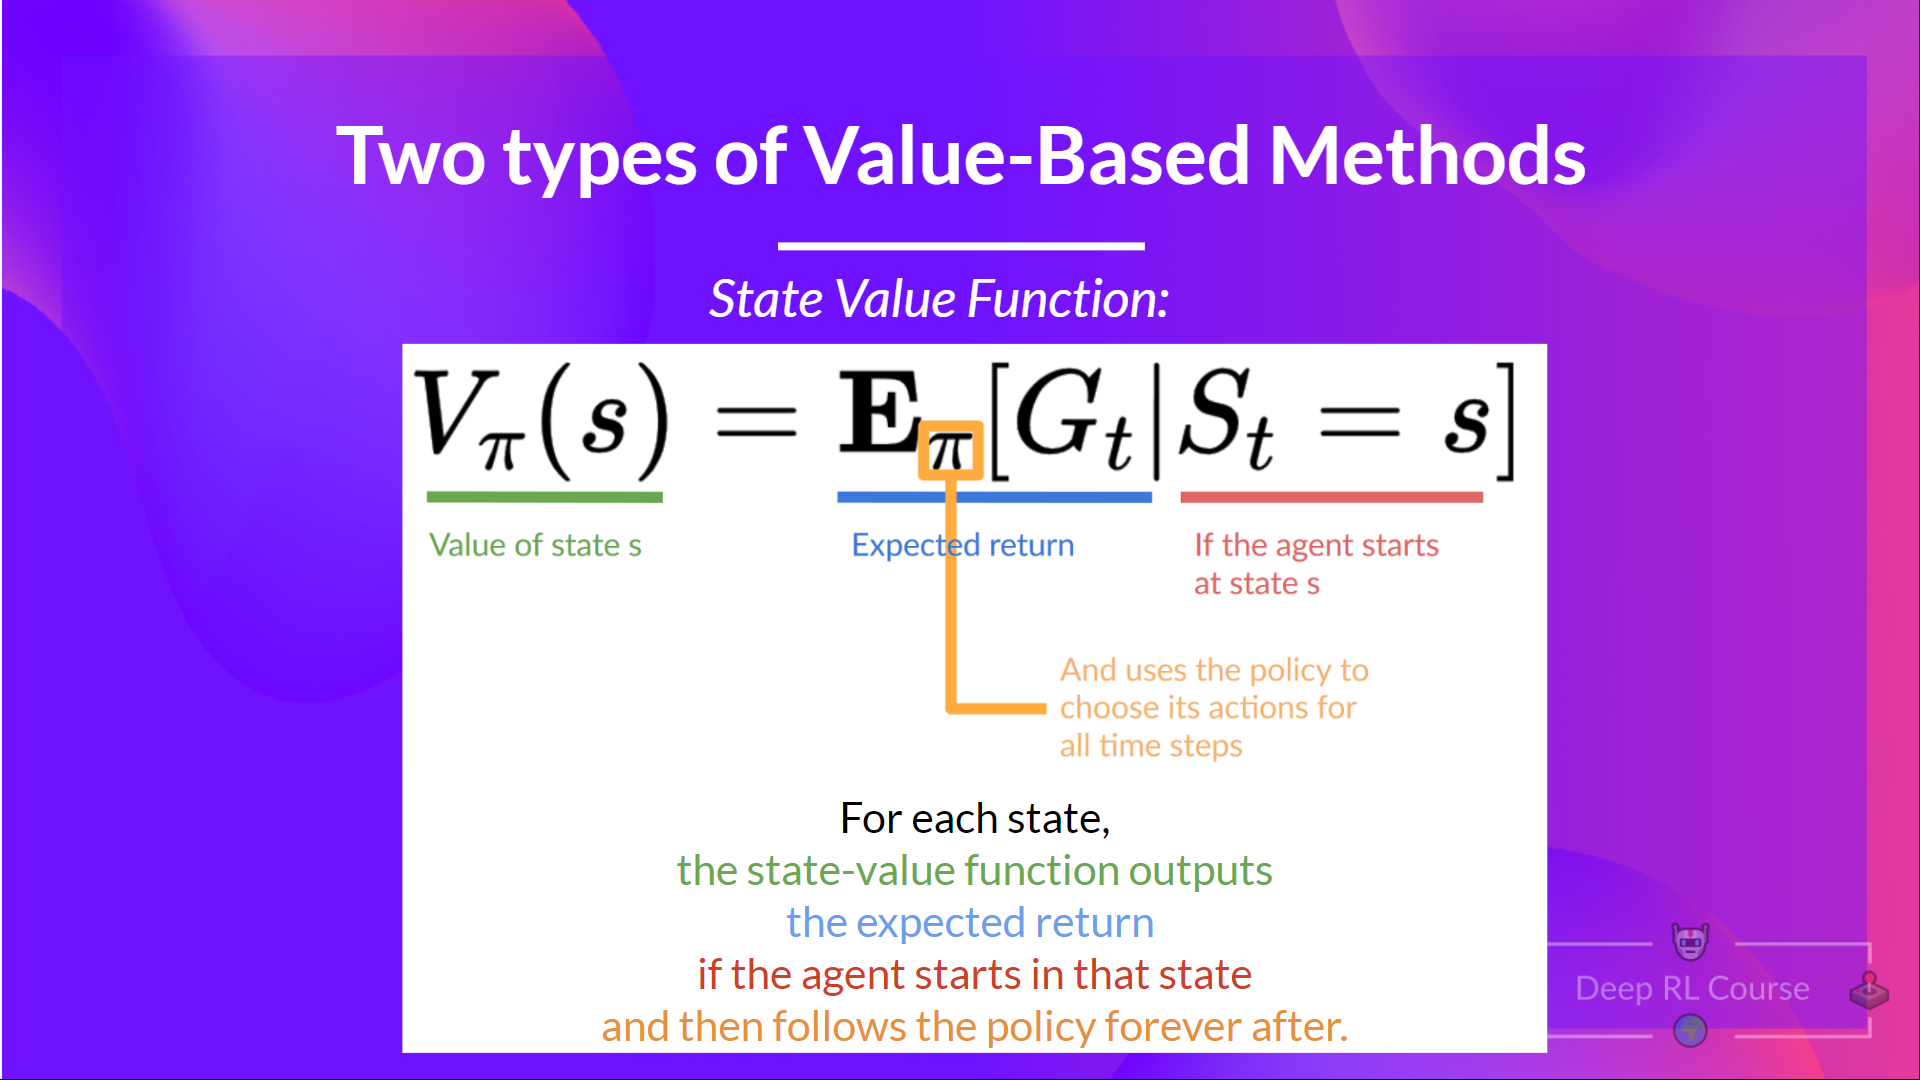 State value function